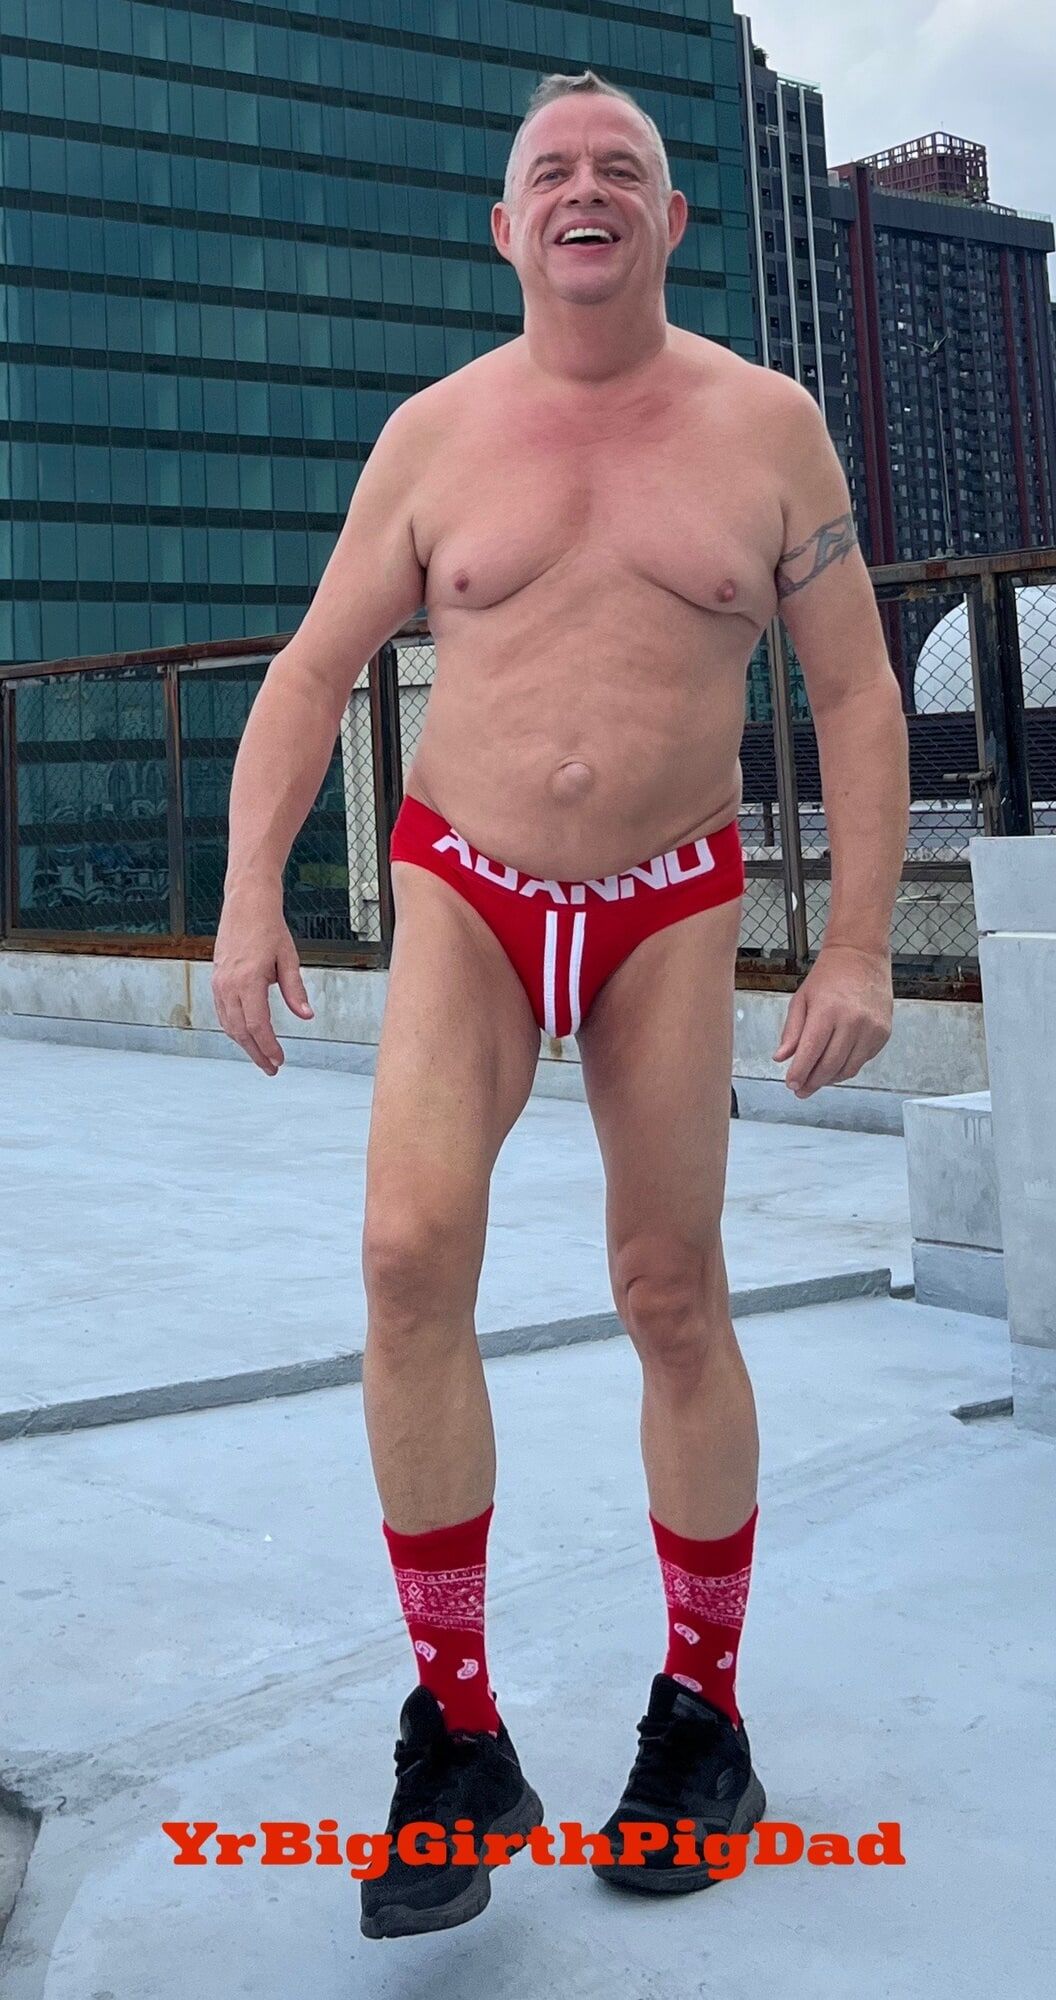 New Jockstrap collection on the roof of my condo. #21